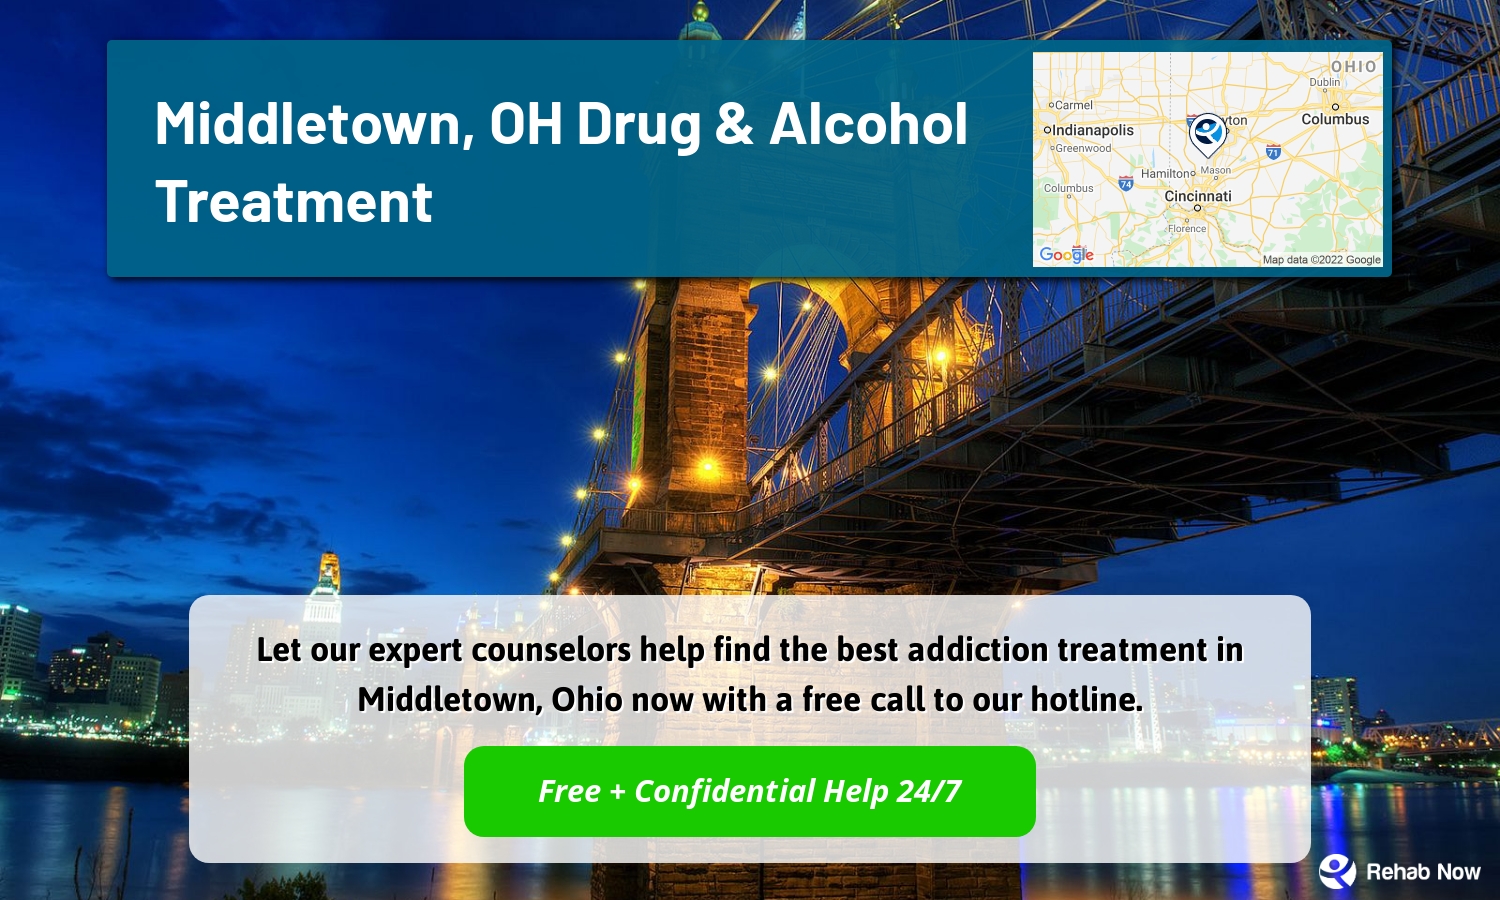 Let our expert counselors help find the best addiction treatment in Middletown, Ohio now with a free call to our hotline.